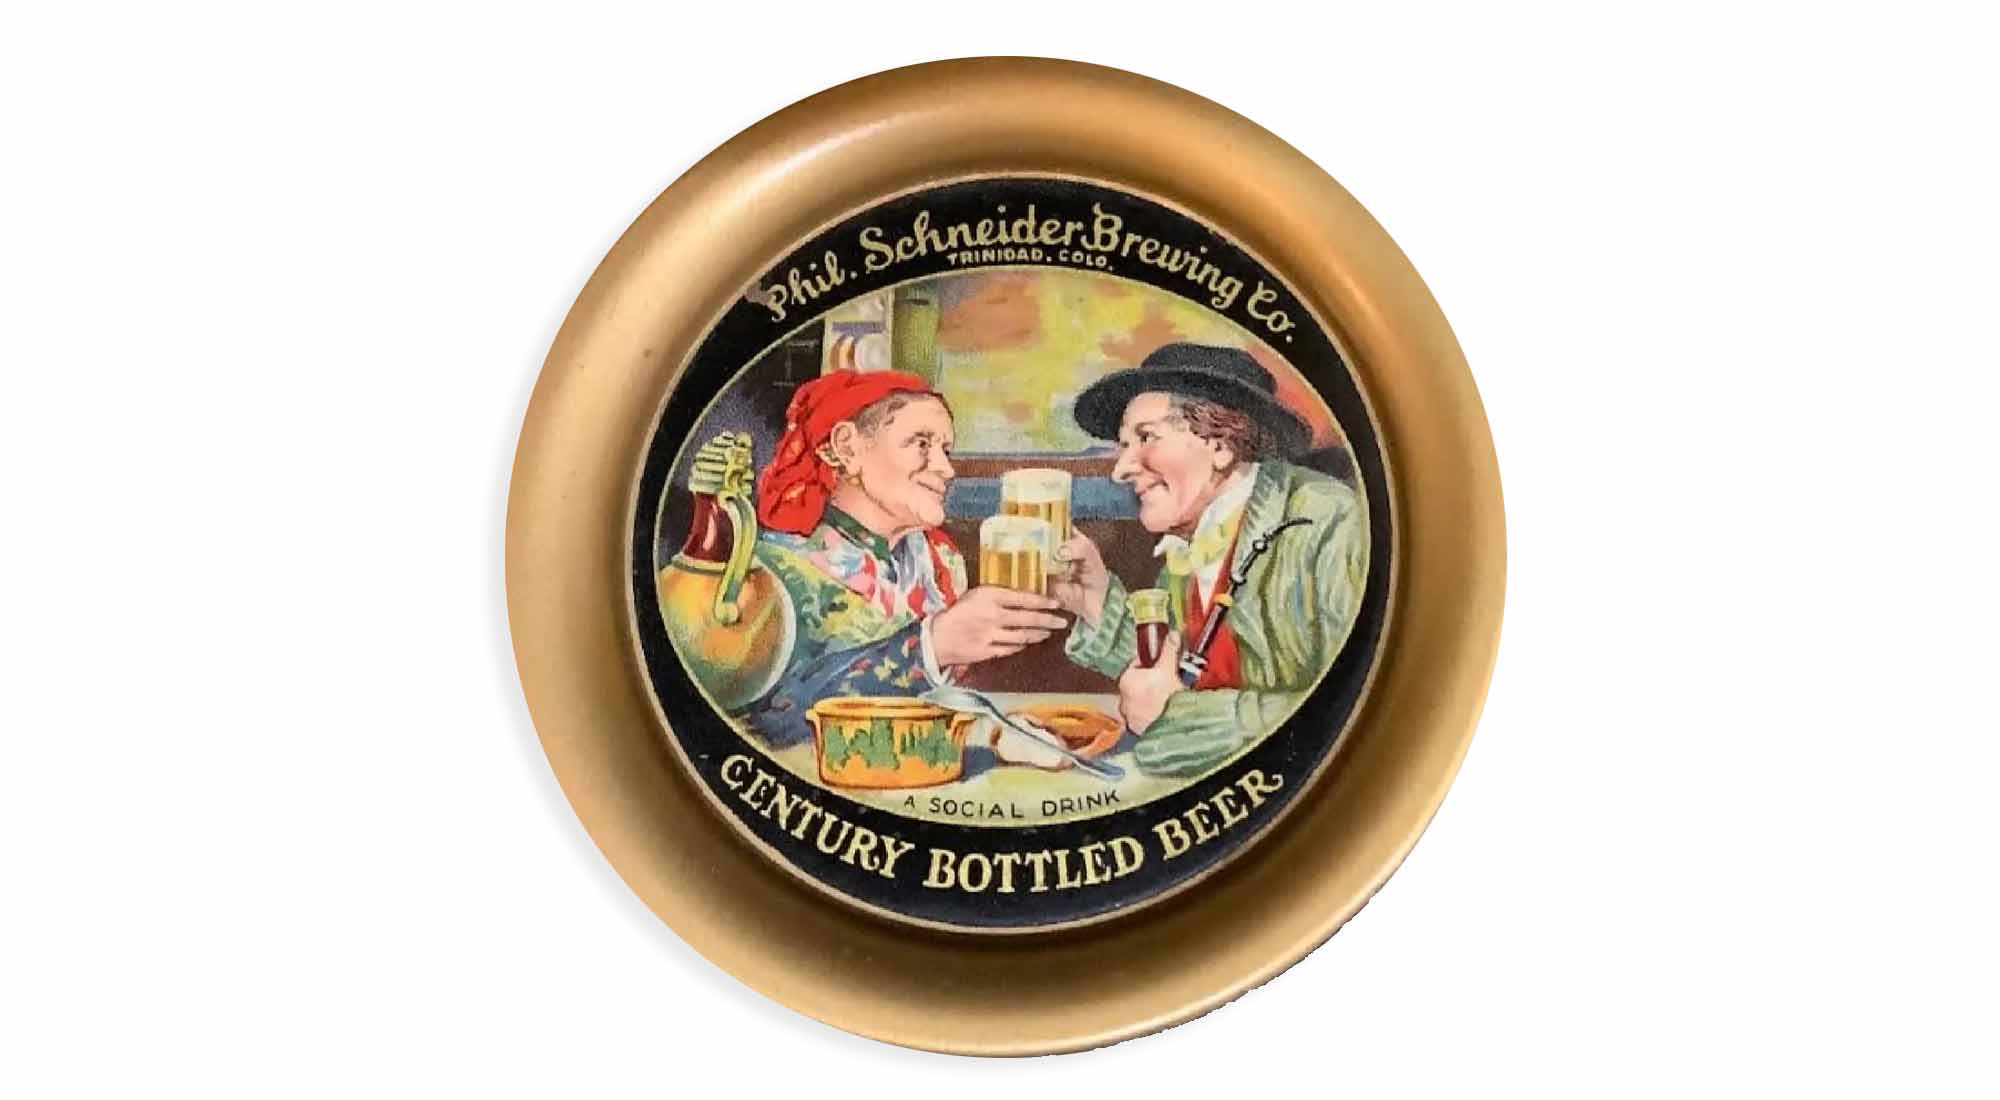 Phil. Schneider Brewing Co. tip tray, estimated at $250-$500 at SJ Auctioneers.